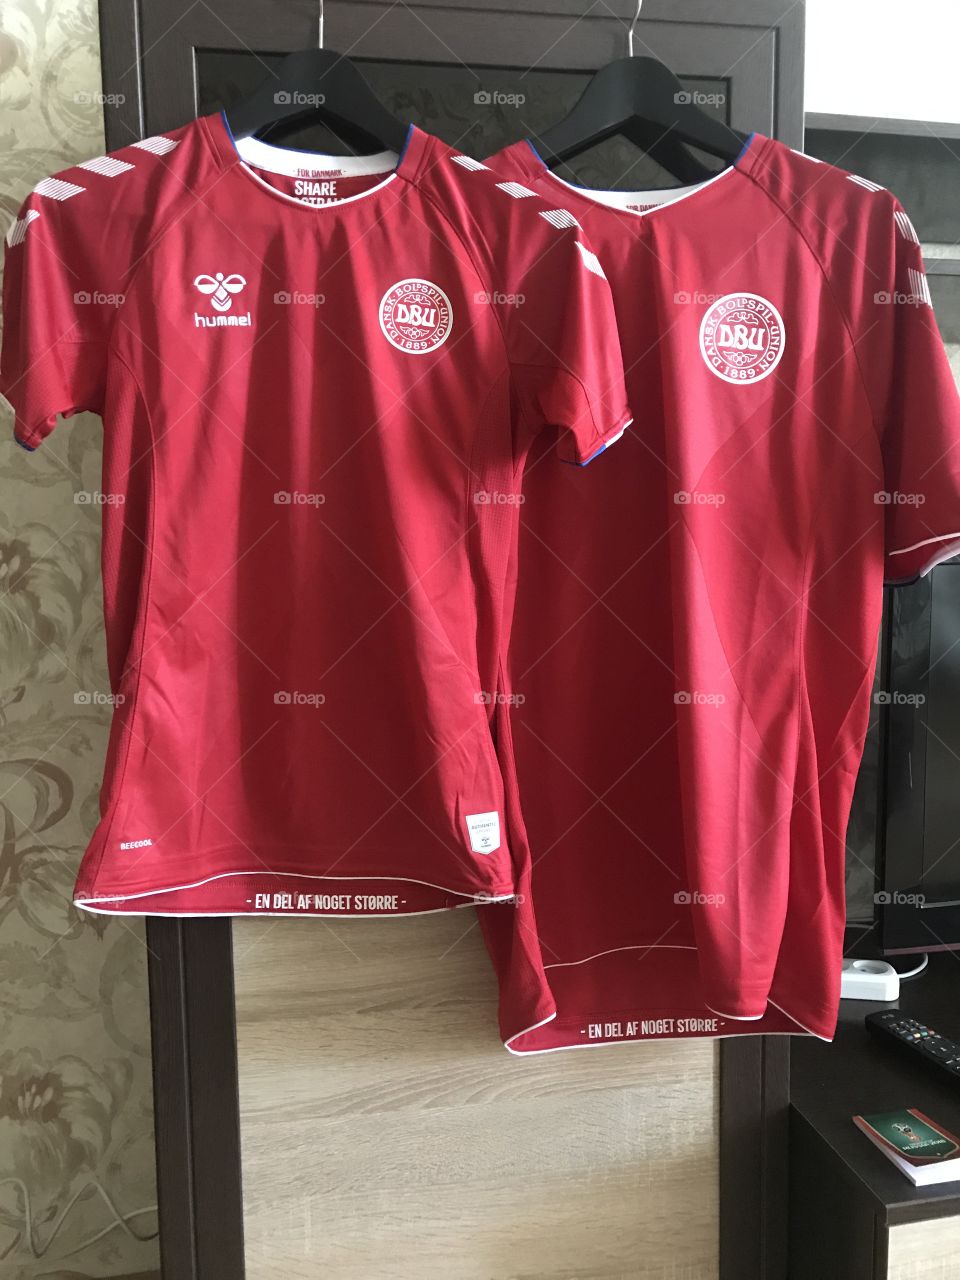 This is the danish national soccer-shirt. My son and i went to Russia to see our national team play against Australia. This is from early morning, before we left for the game.